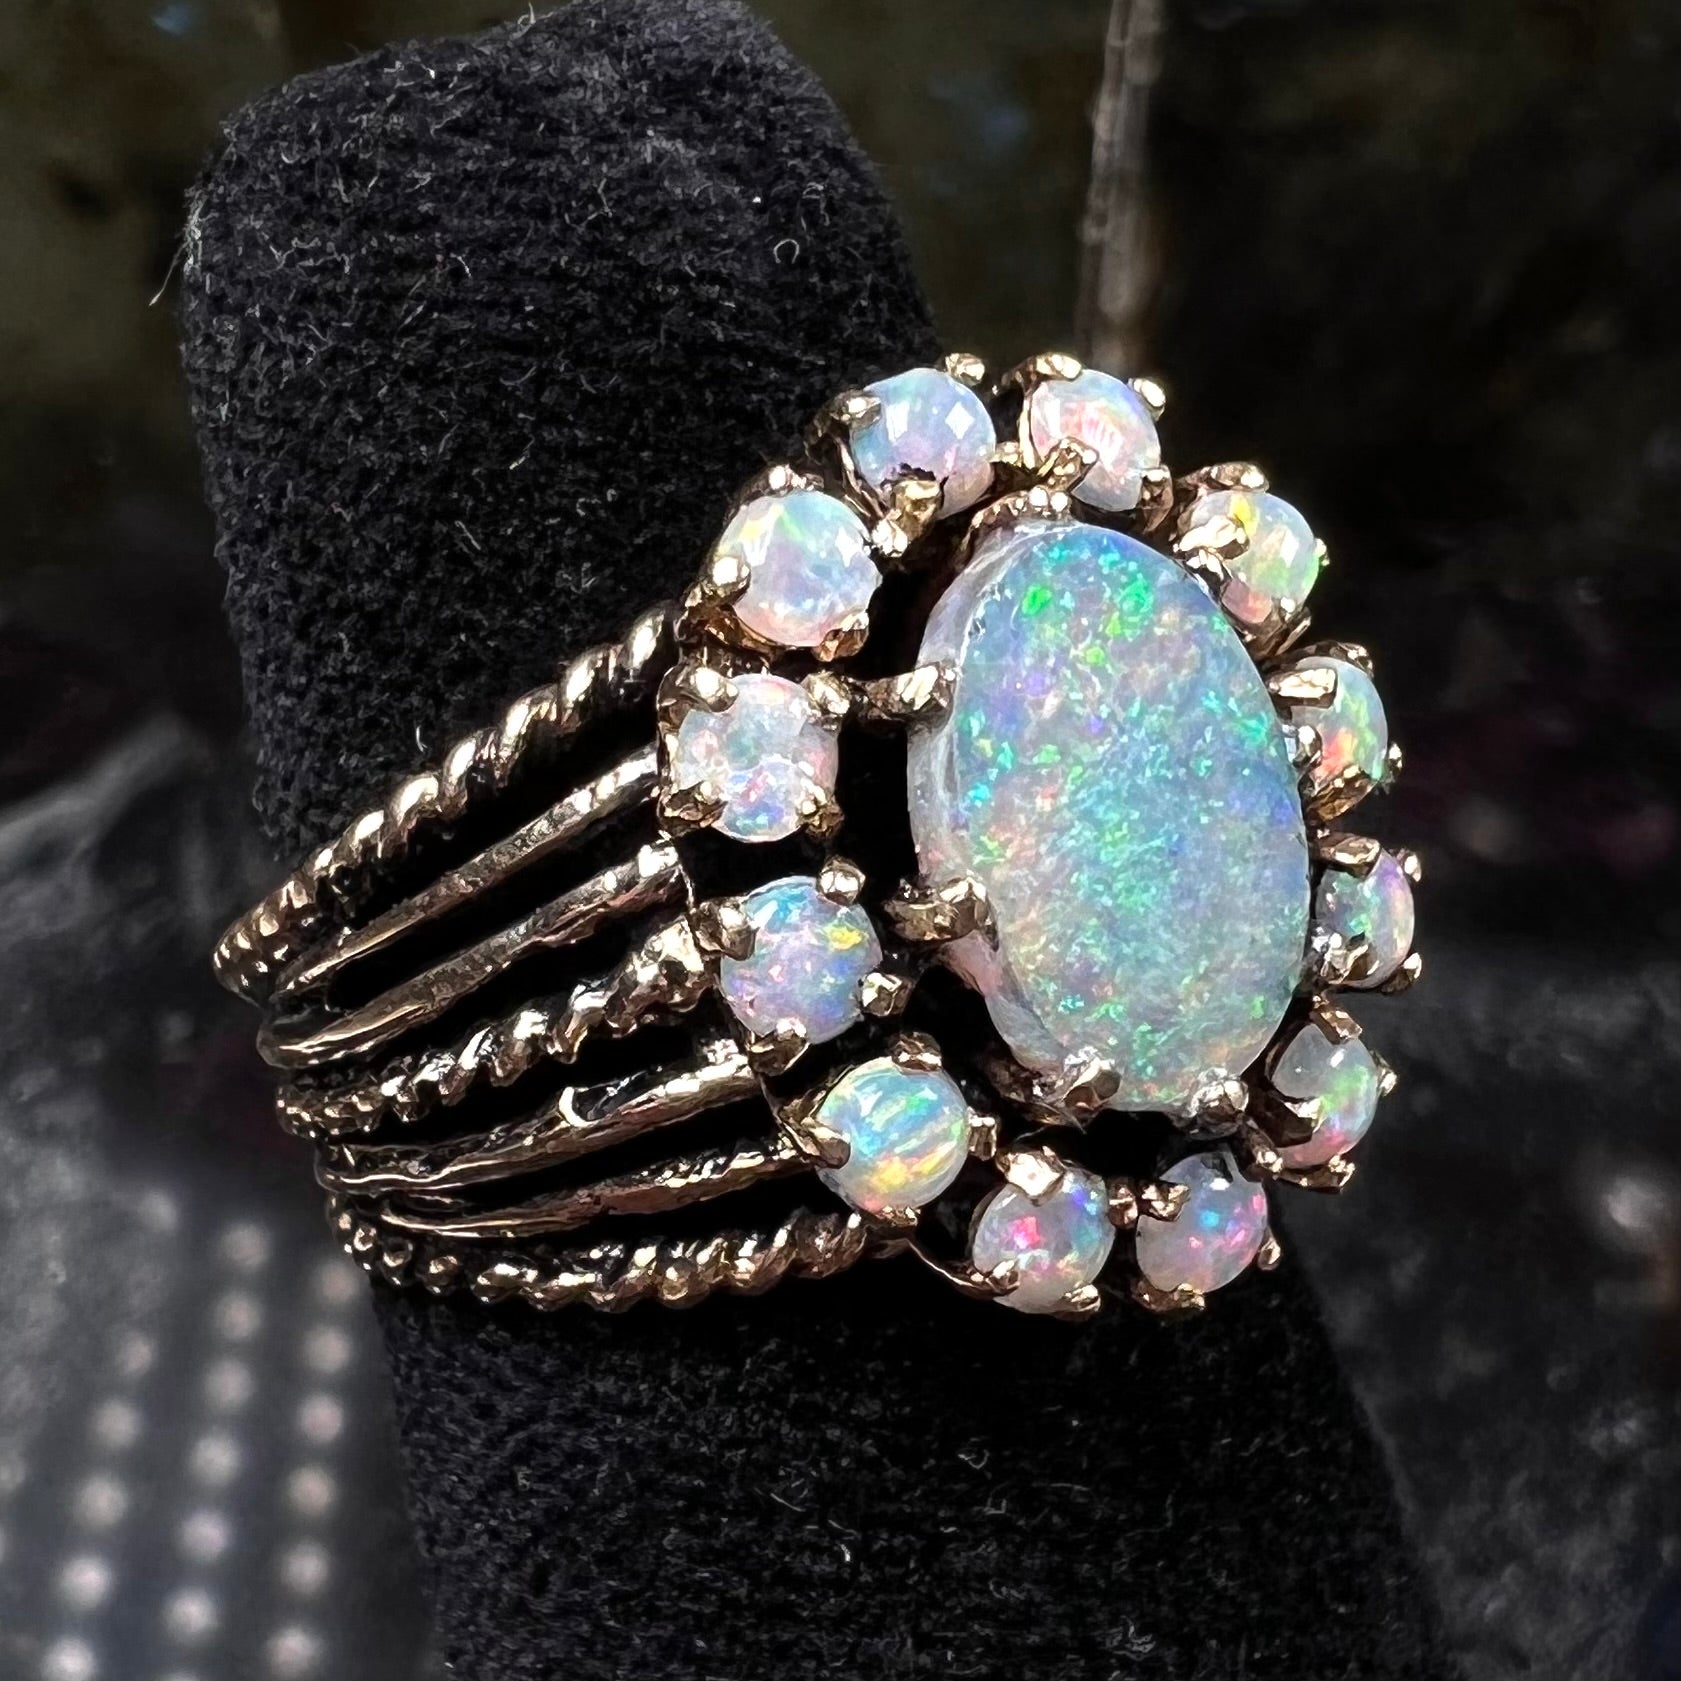 Vintage yellow gold oval opal cabochon ring set with 12 round opals in a halo around the center stone.